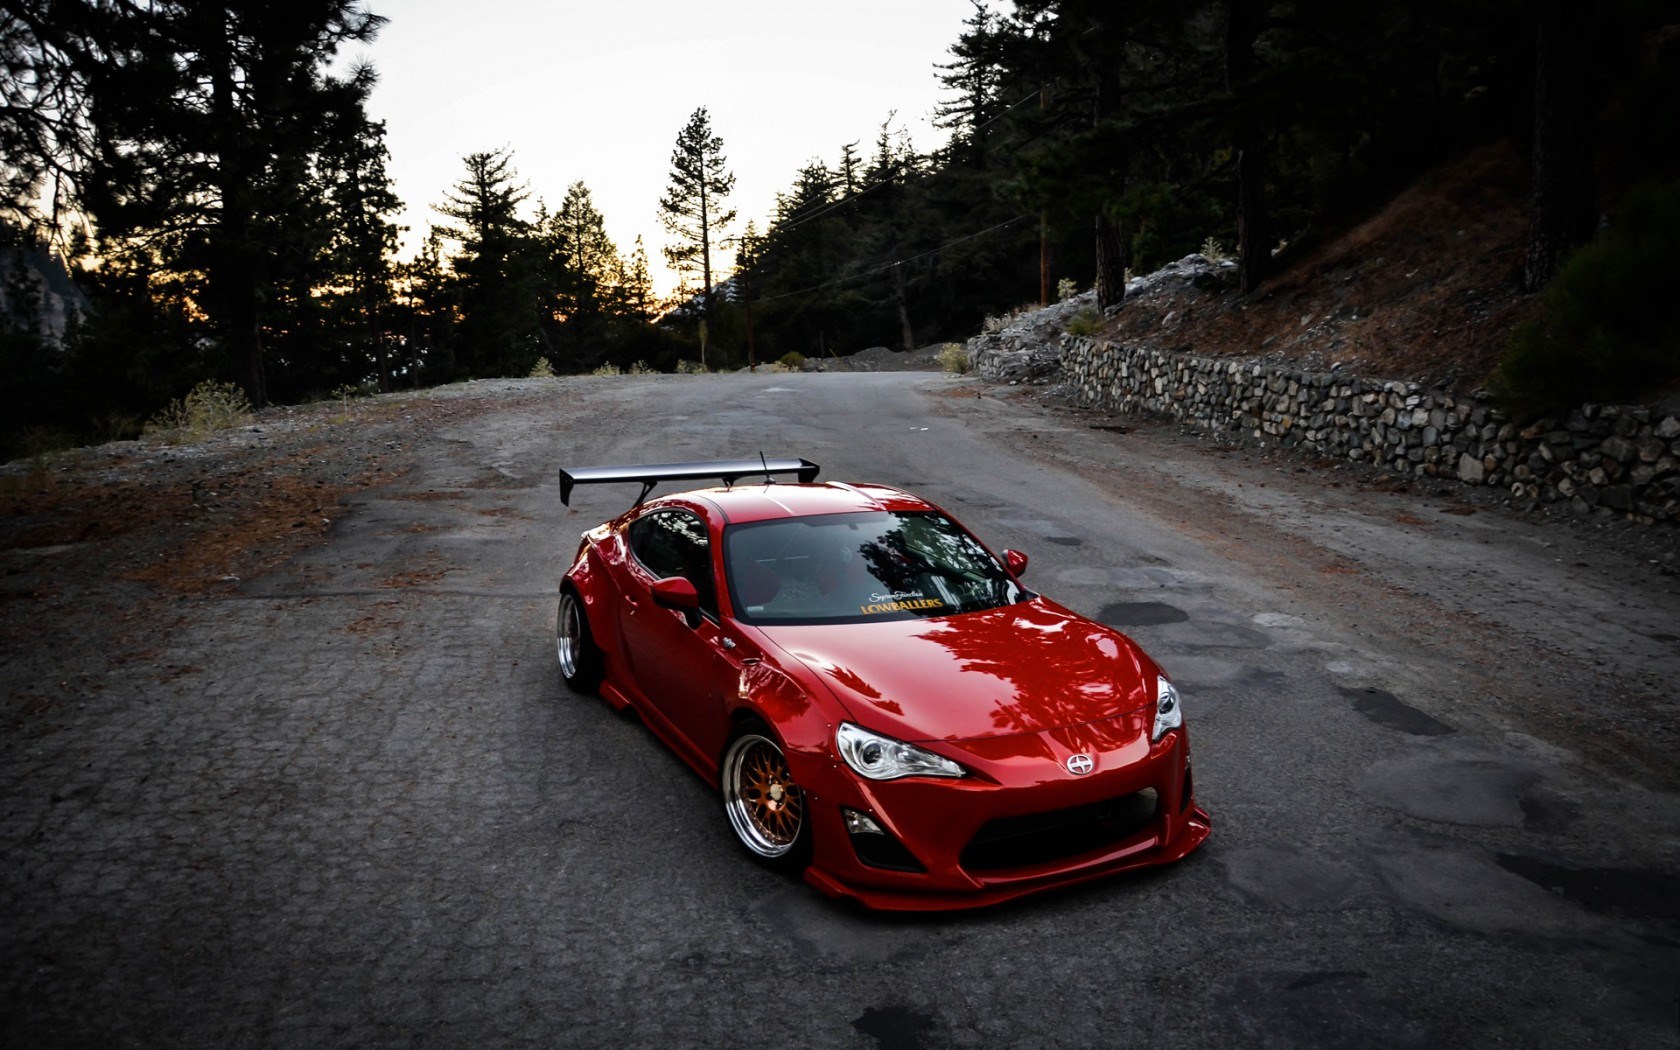 14 Scion FR-S HD Wallpapers | Background Images ...